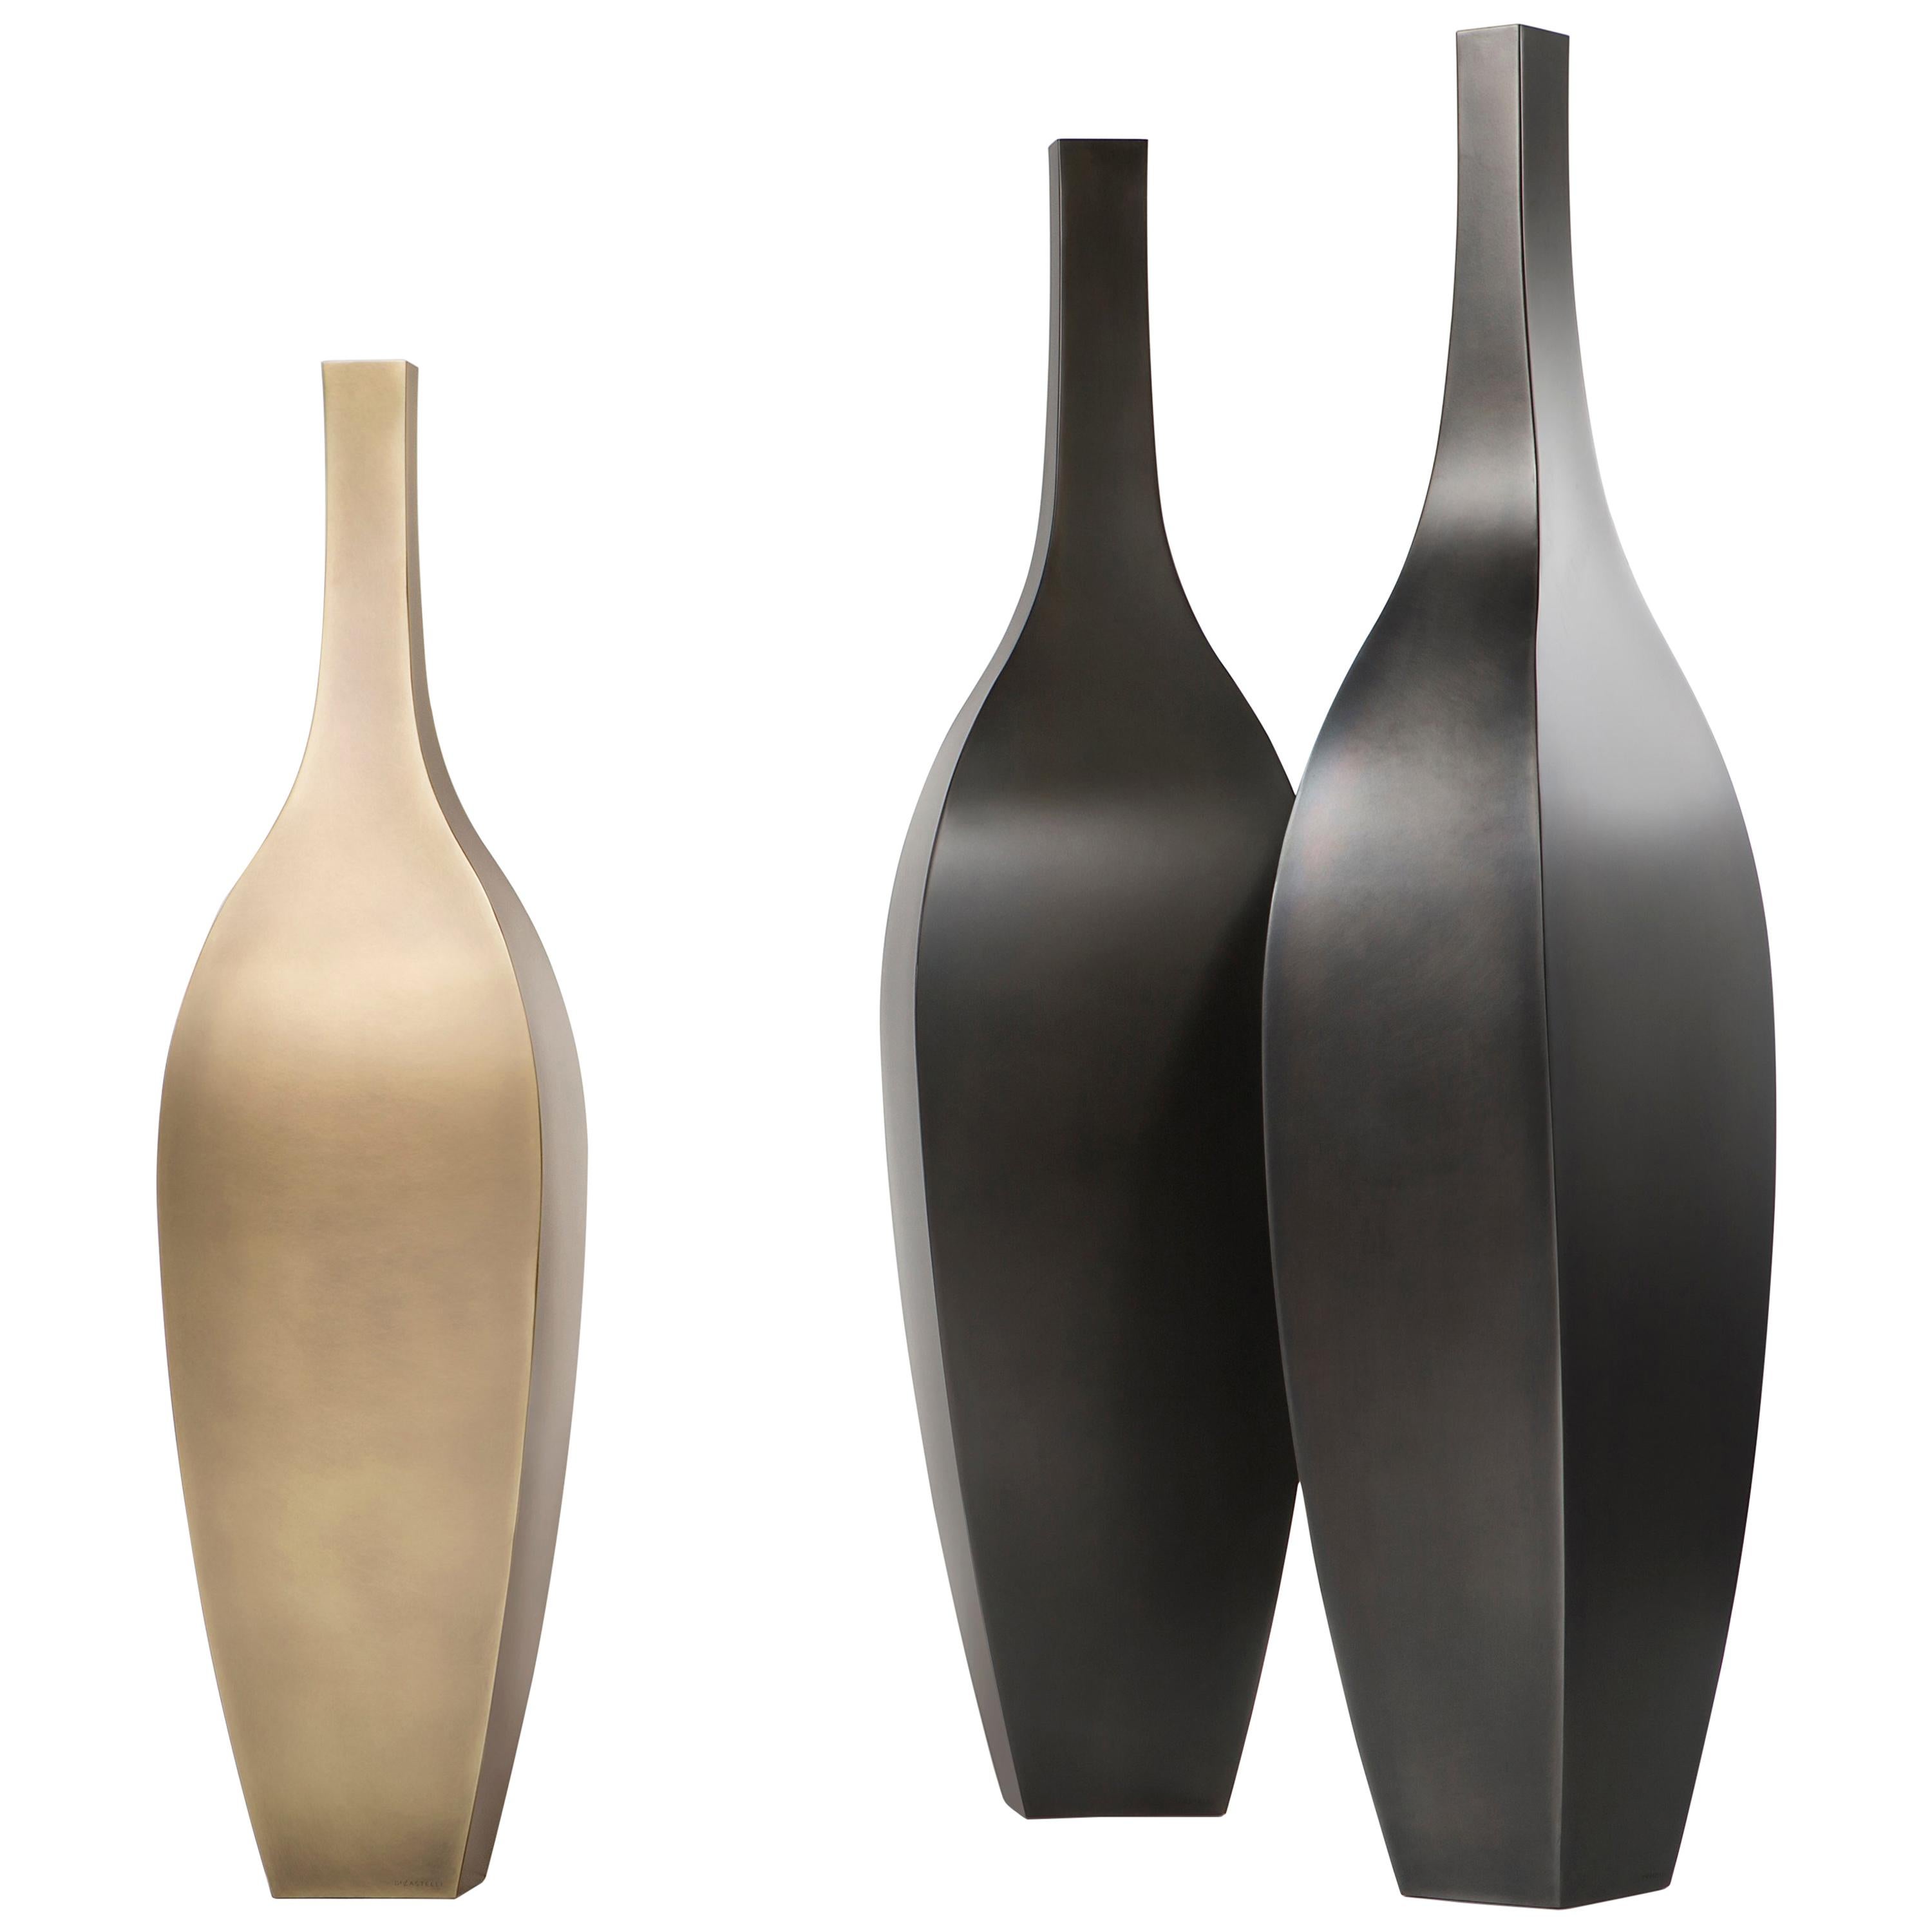 DeCastelli Rocco 175 Vase in Stainless Steel by Stefano Dussin For Sale